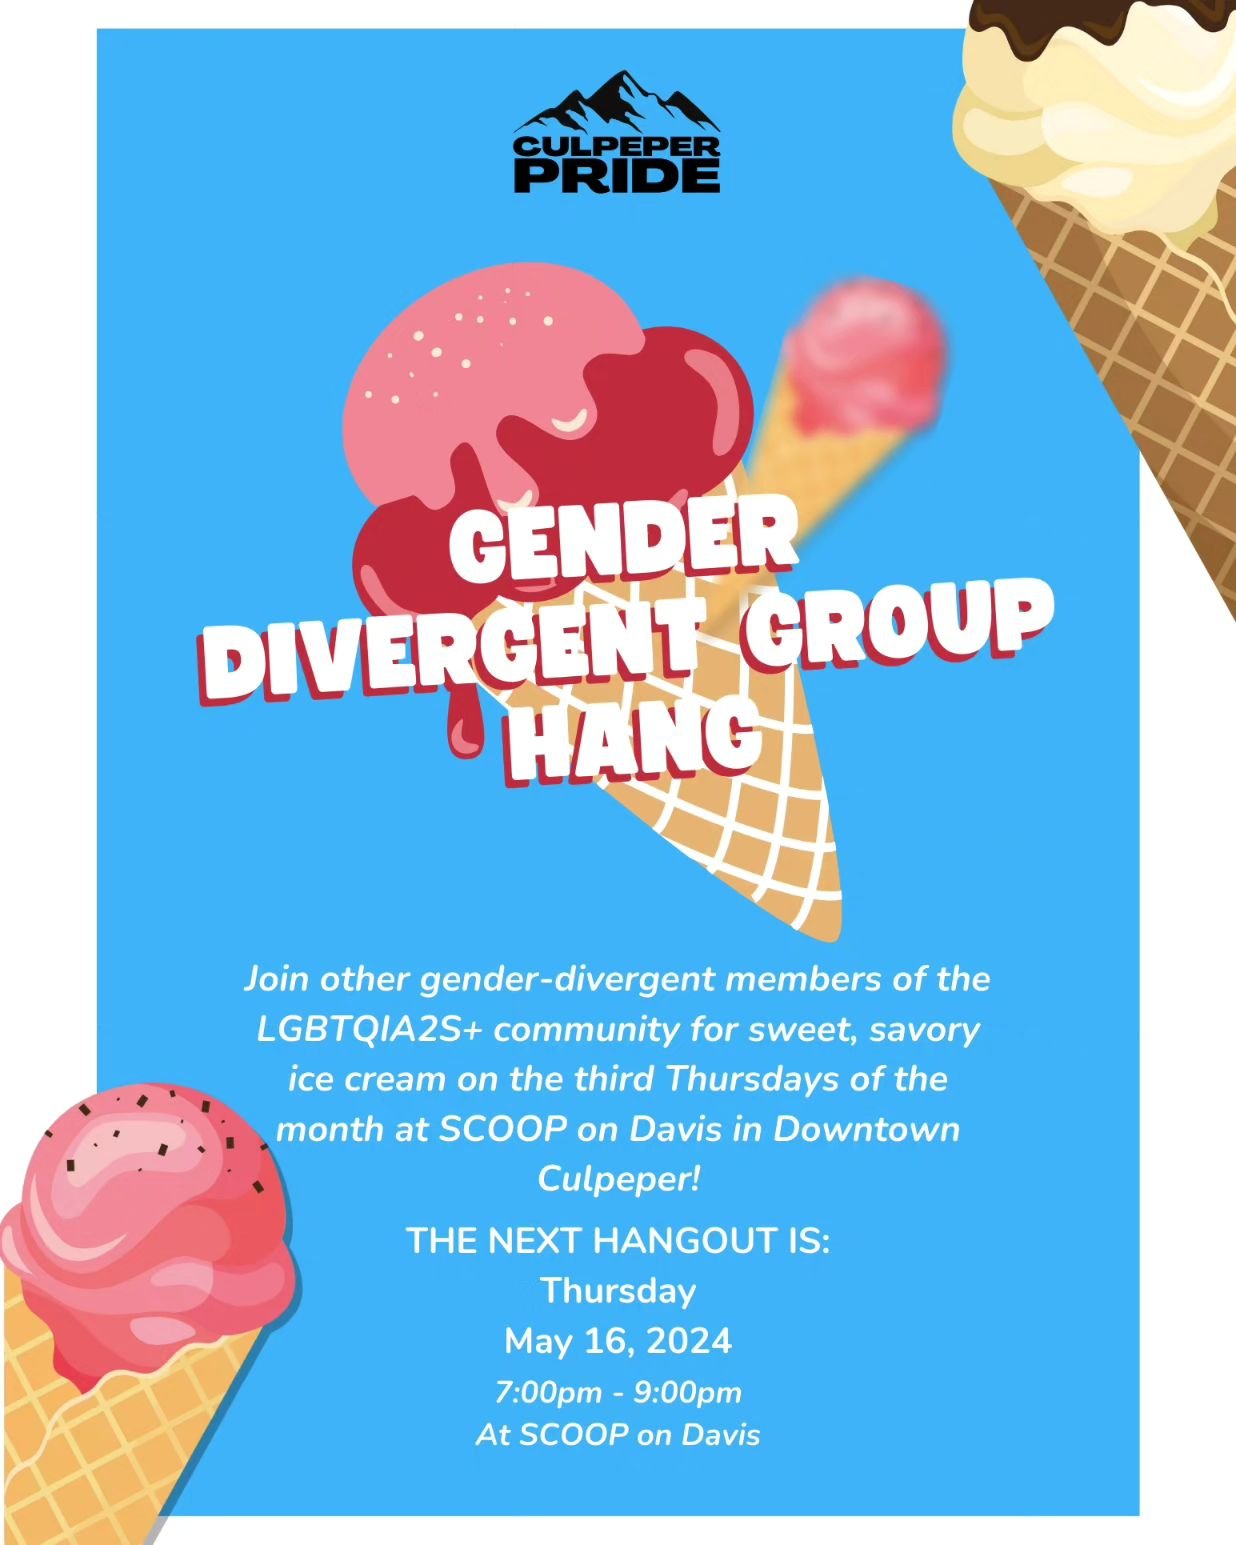 Tomorrow night is our Gender Divergent Group Hang! Be there or be square! You won't want to miss this one! ✨️💖🌈